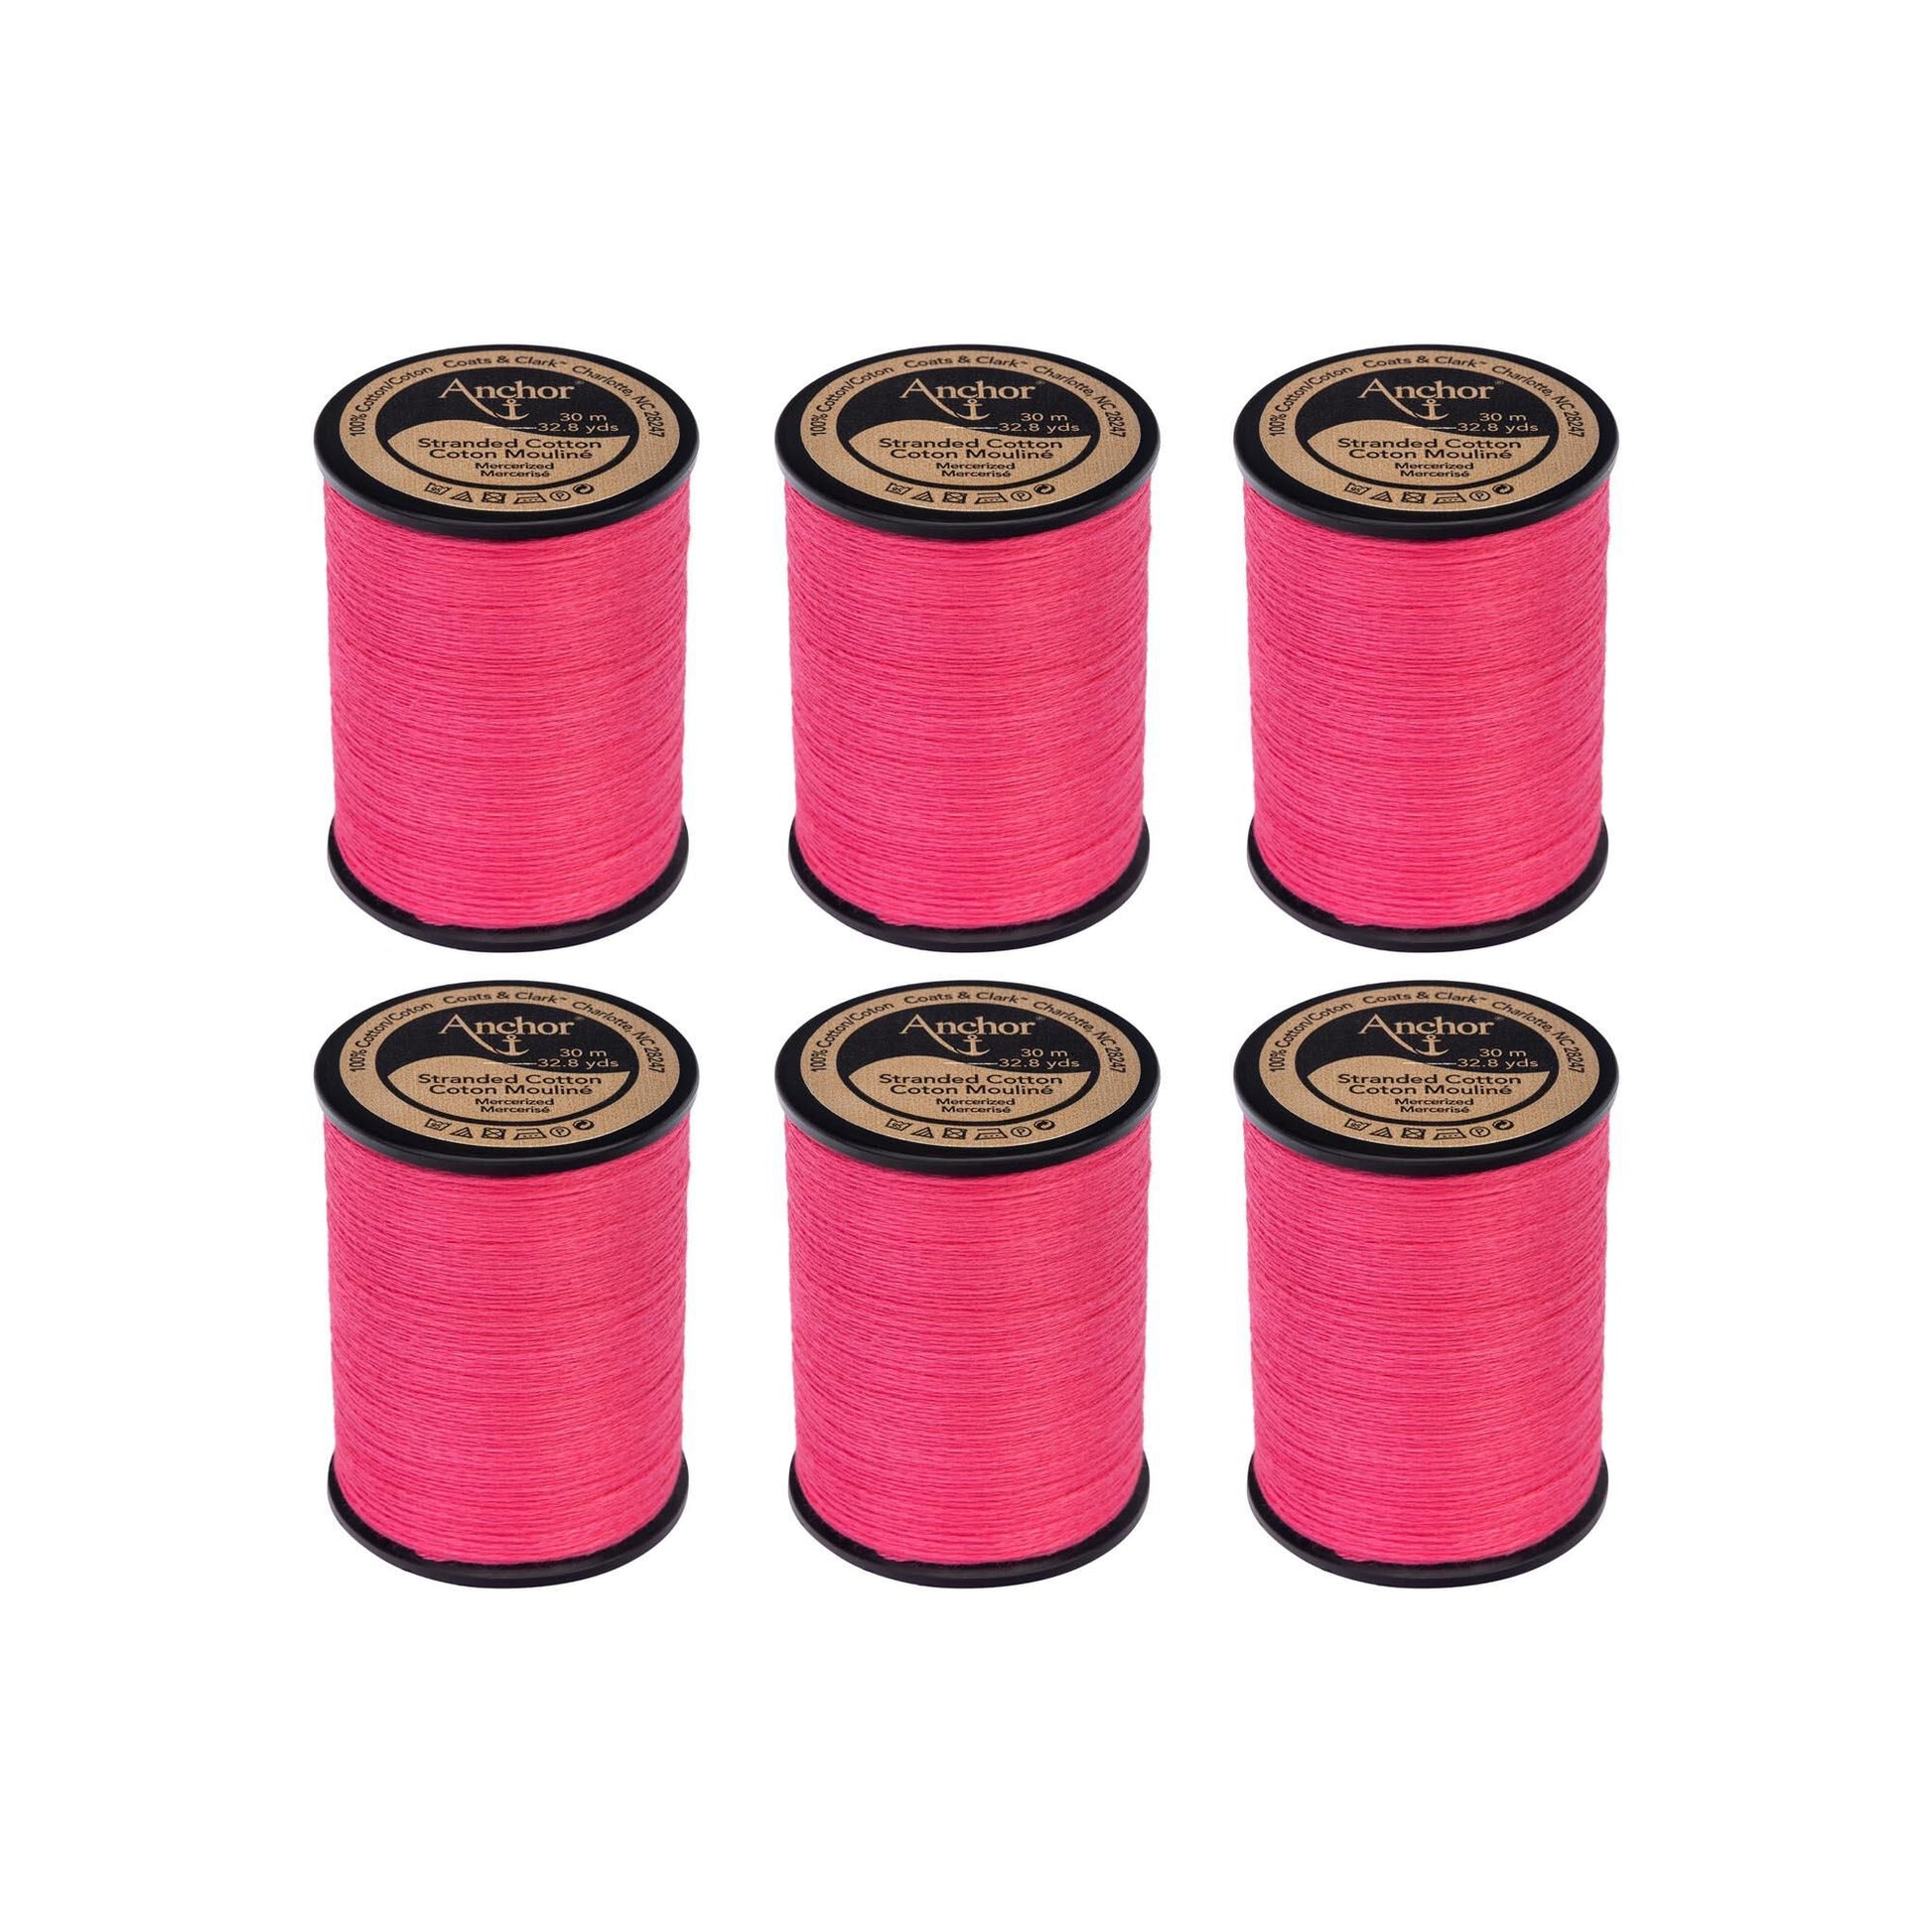 Anchor Spooled Cotton 30 Meters (6 Pack)